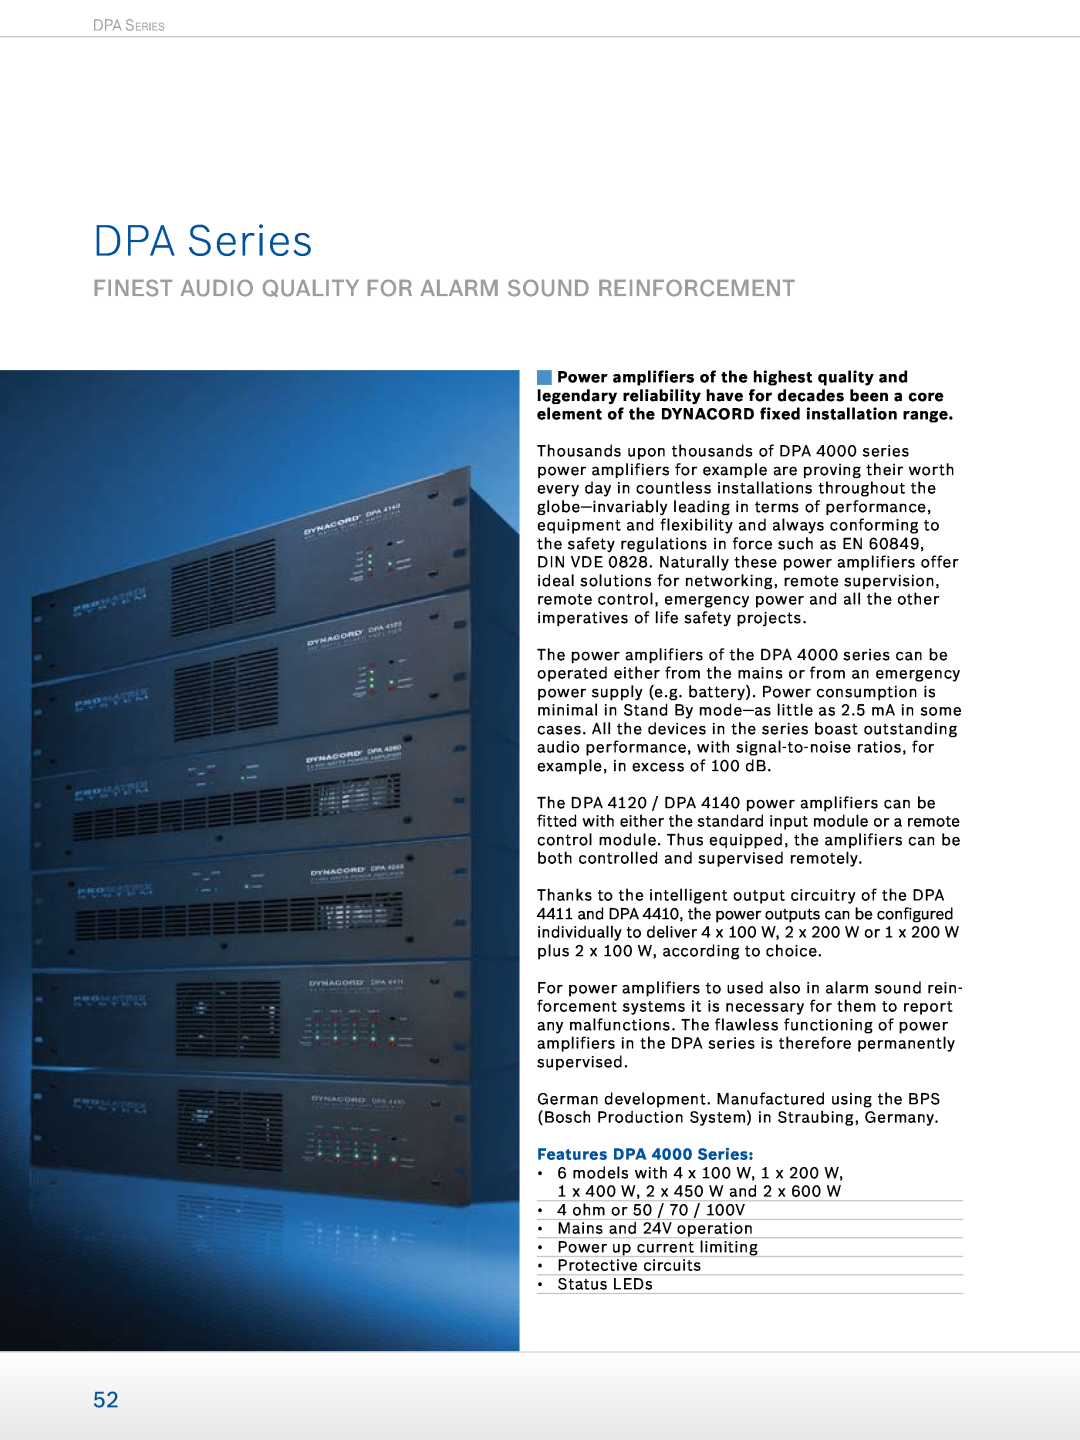 Dynacord Professional Power Amplifiers manual DPA Series, Features DPA 4000 Series 